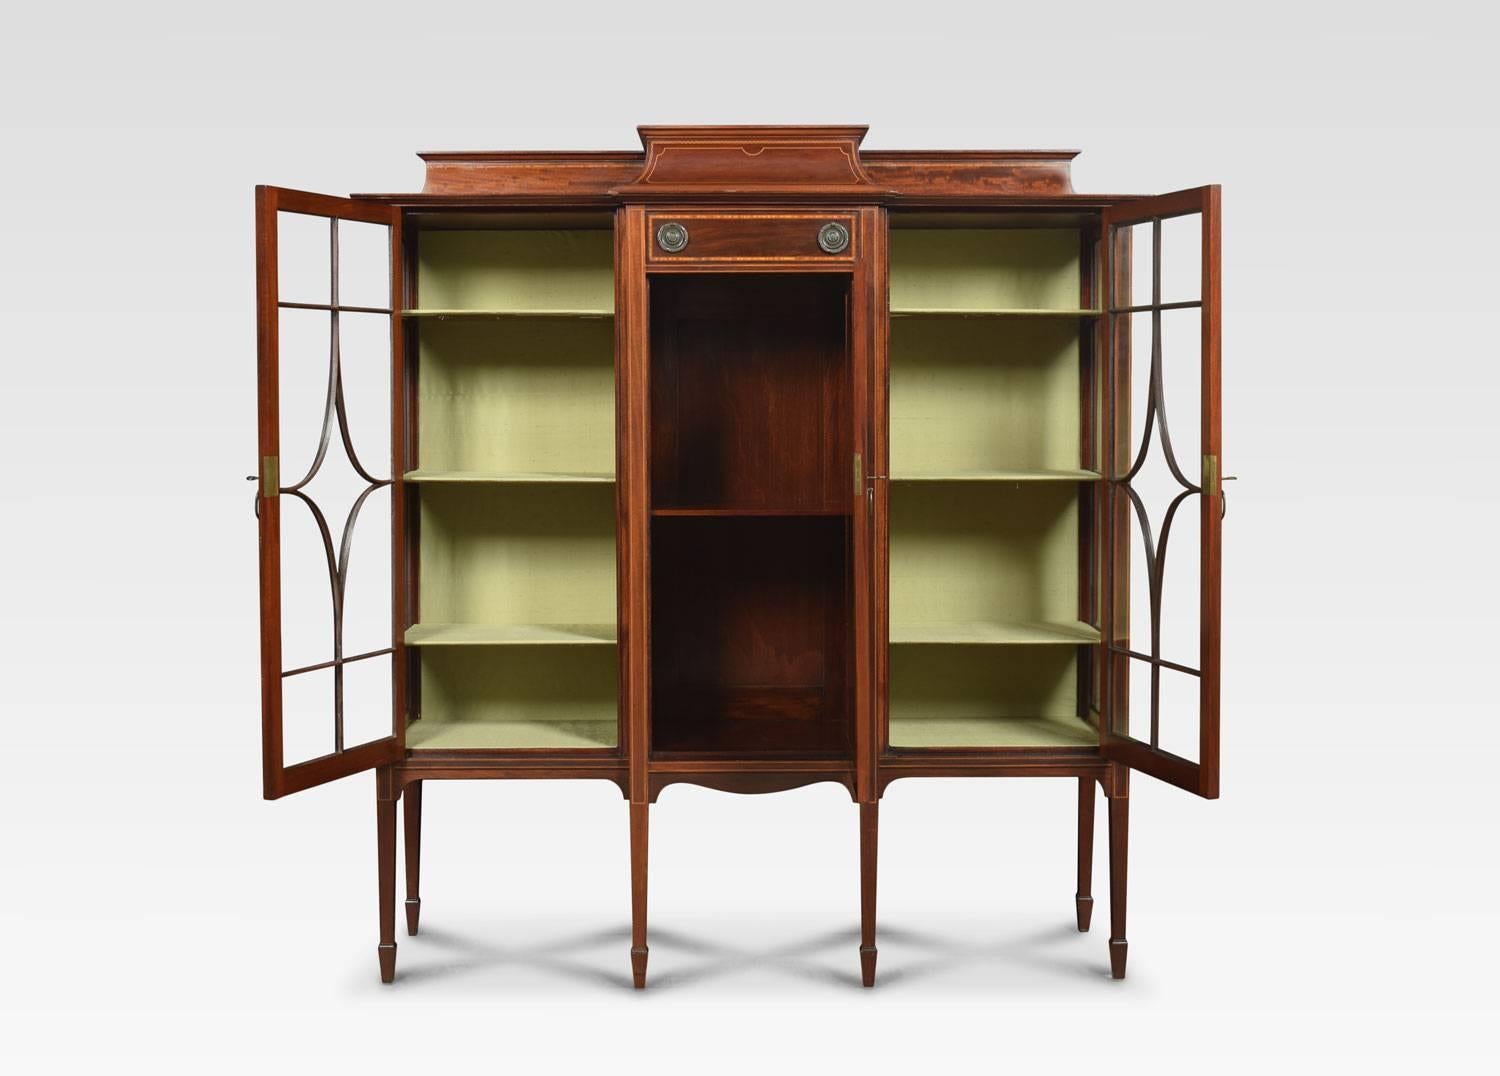 Edwardian mahogany breakfront display cabinet, The raised three quarter gallery having a central short drawer, crossbanded with satinwood. Over an inlaid recessed panel cupboard door opening to reveal single fixed shelf flanked on either side with